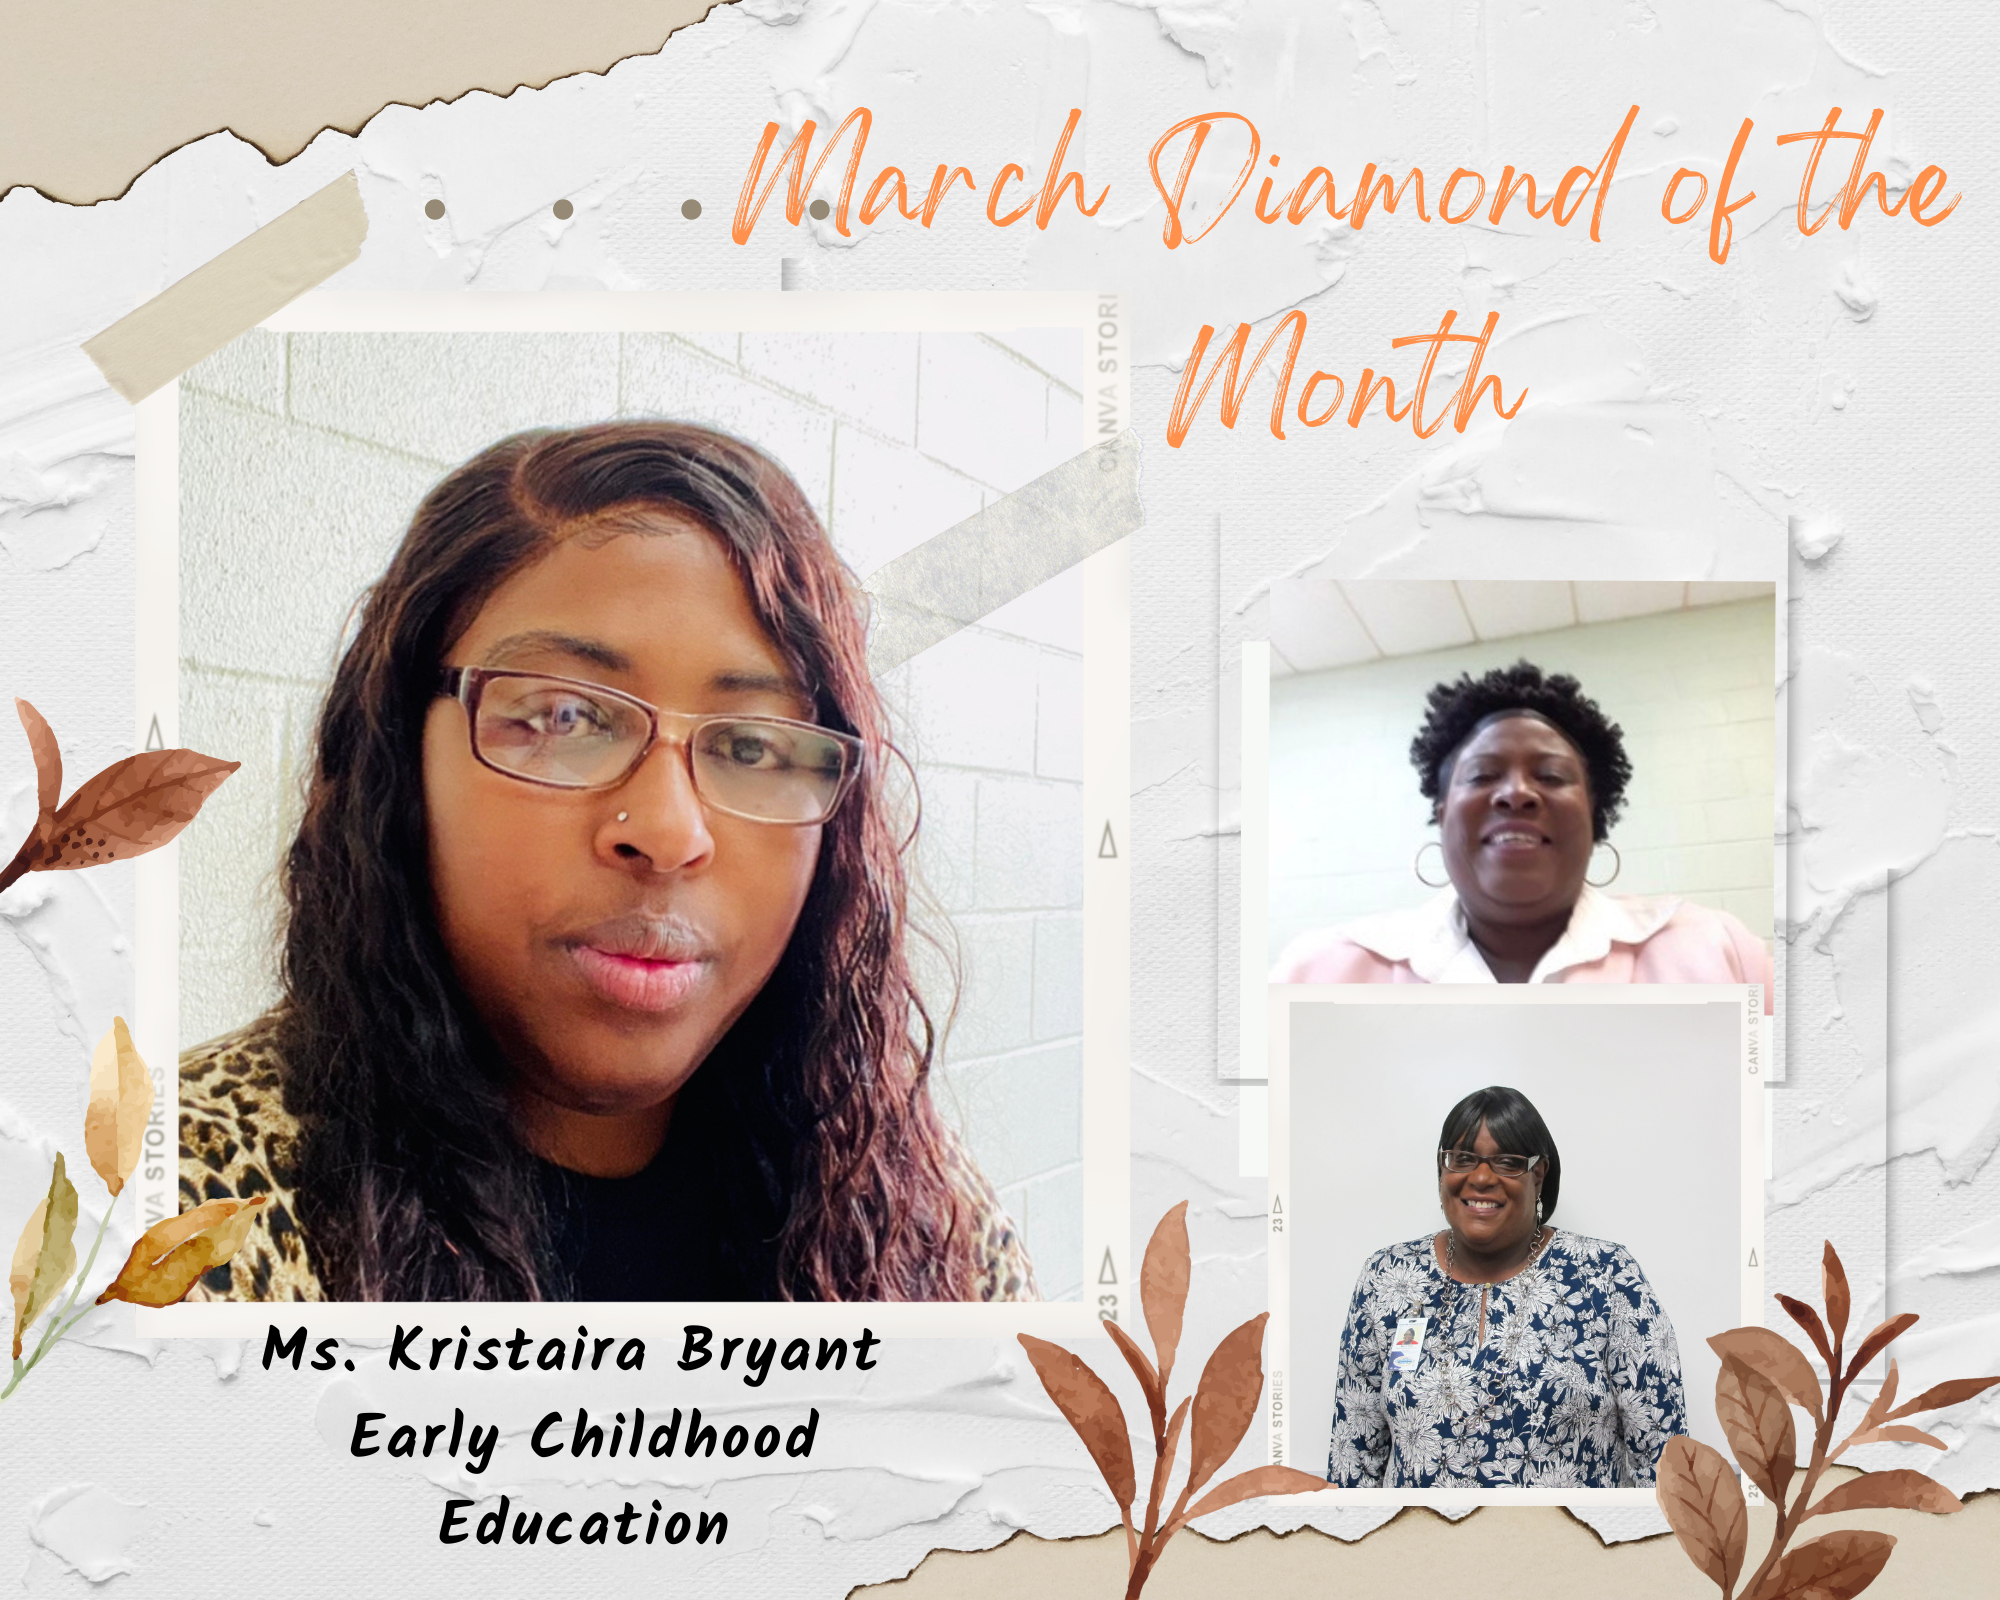 March Diamond of the Month, Ms. Kristaira Bryant, Early Childhood Education